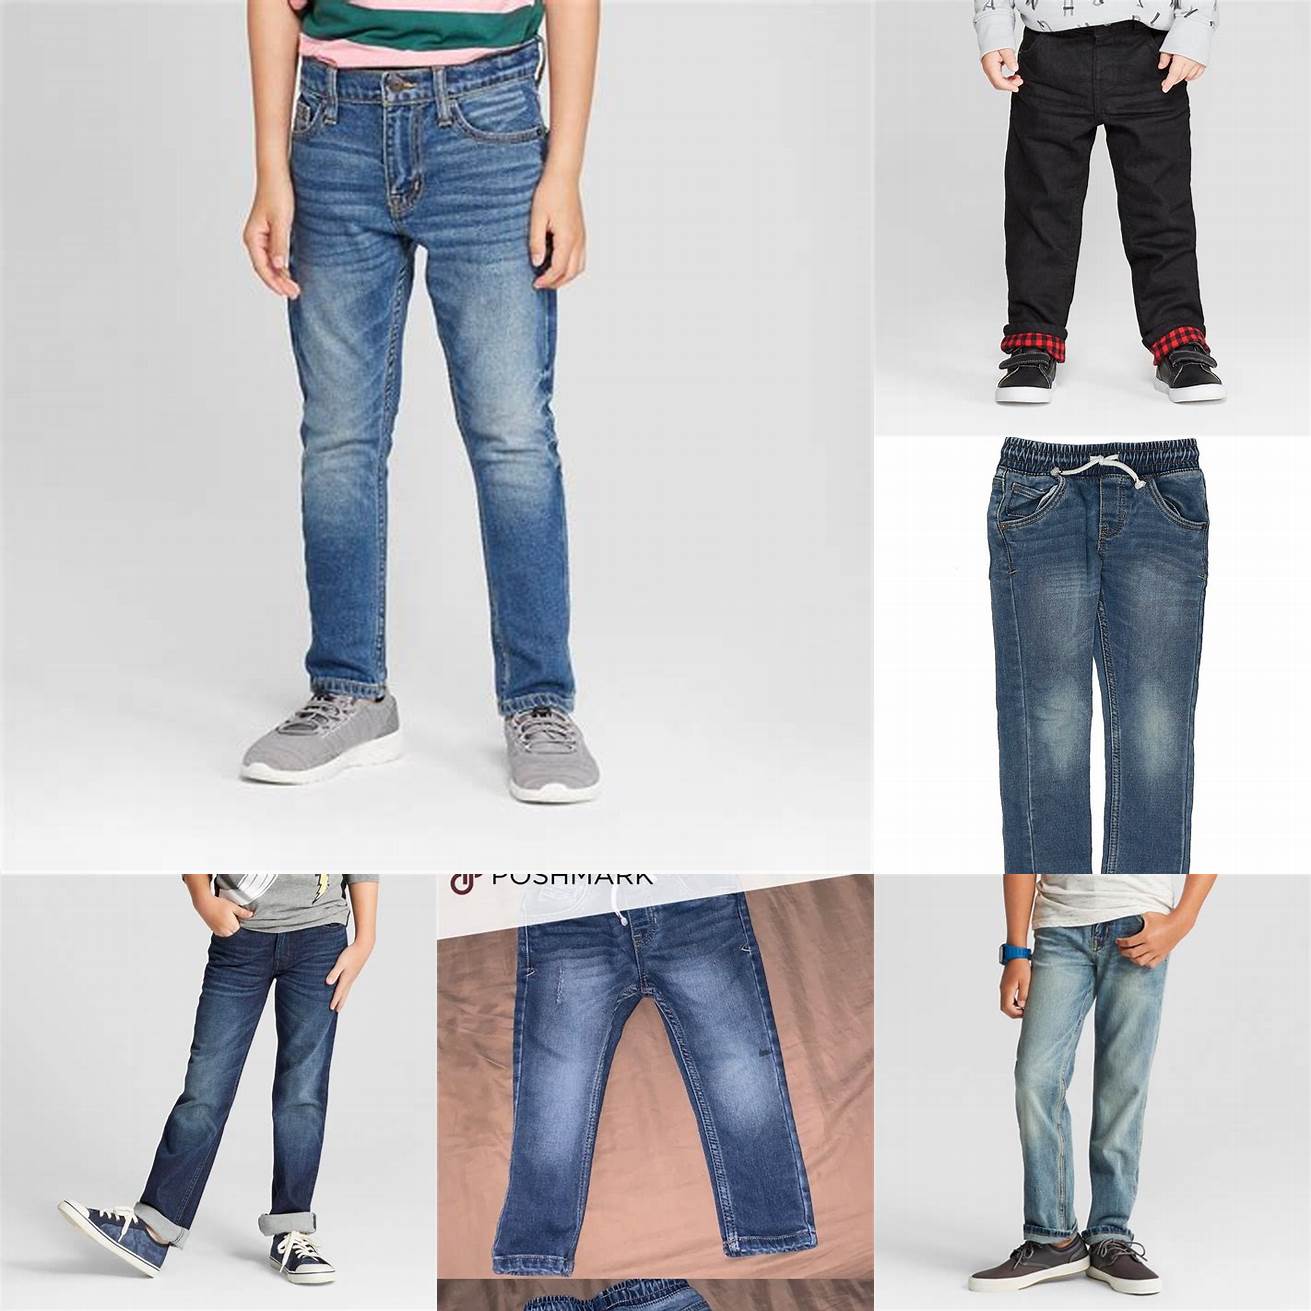 Cat and Jack Boys Jeans